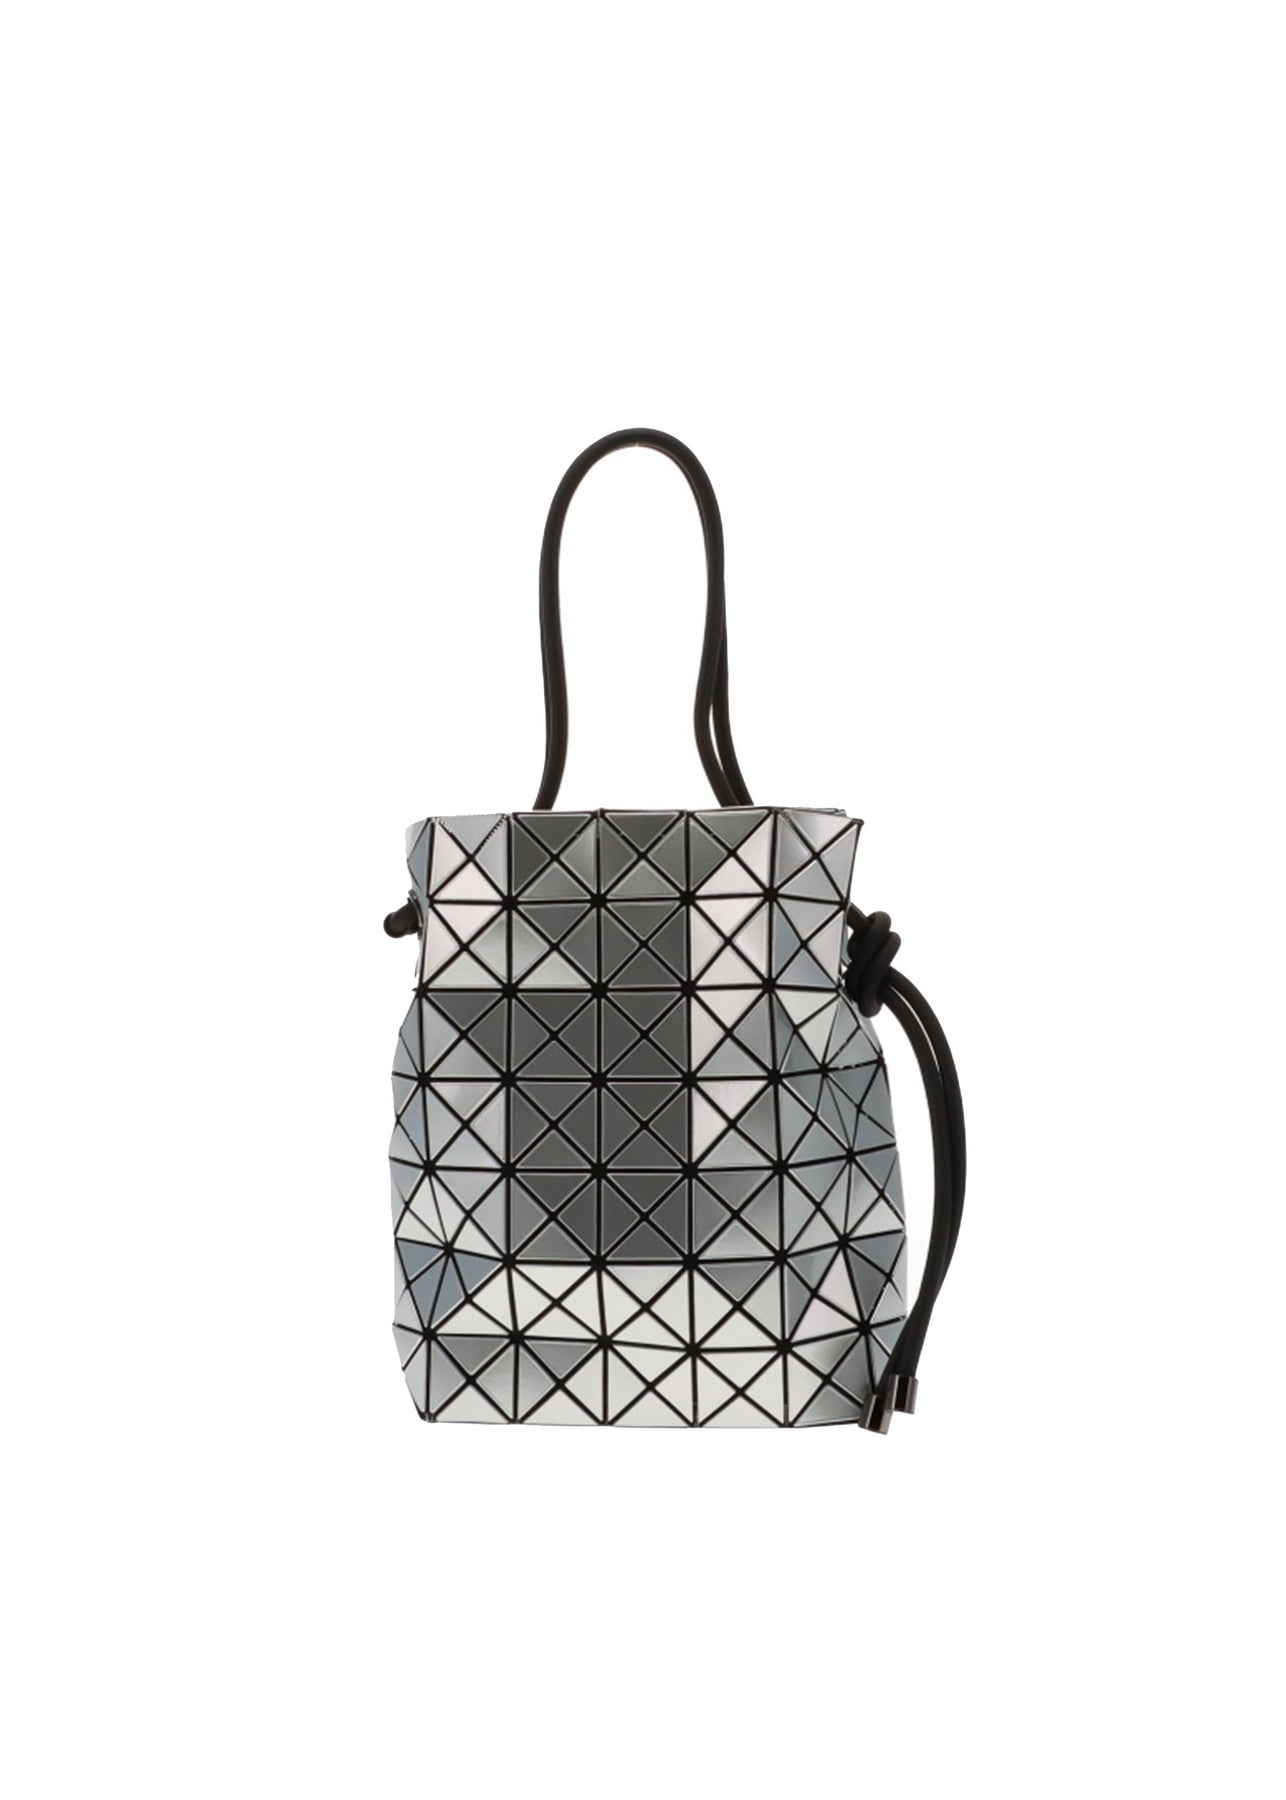 WRING SHOULDER BAG, The official ISSEY MIYAKE ONLINE STORE